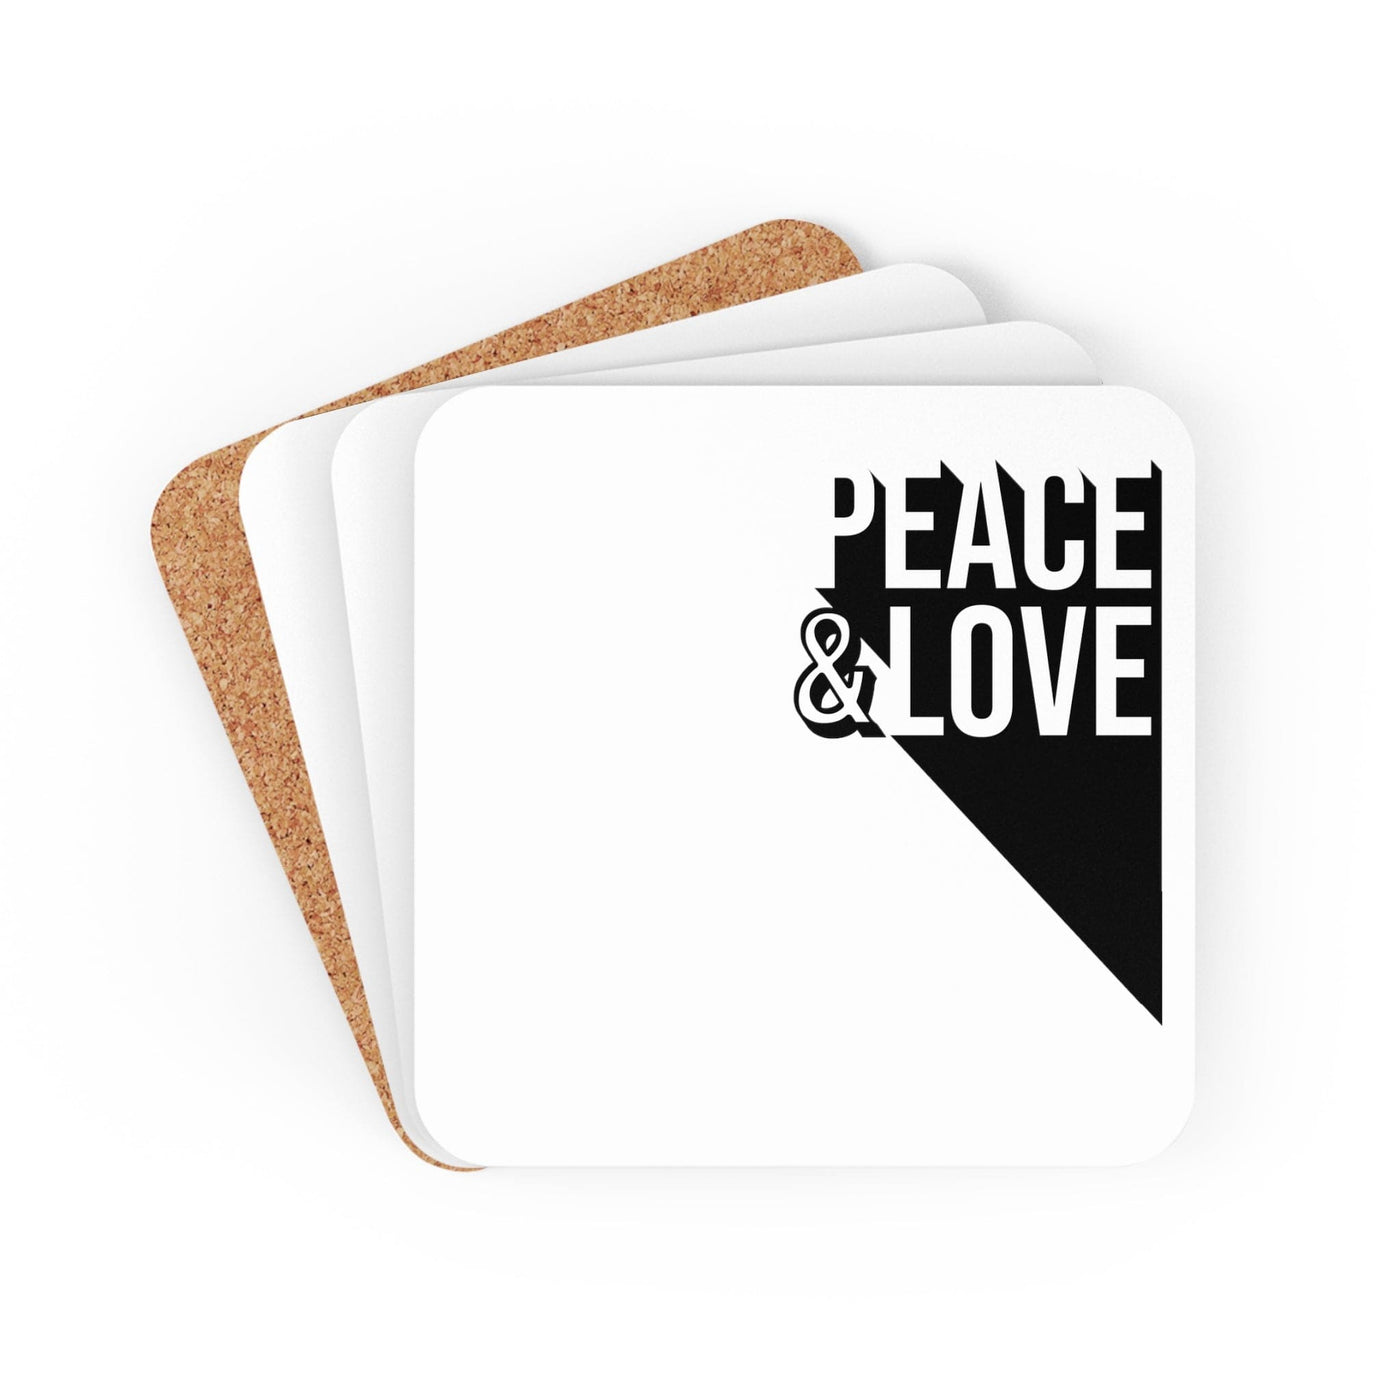 Coaster Set Of 4 For Drinks Peace And Love Print - Decorative | Coasters